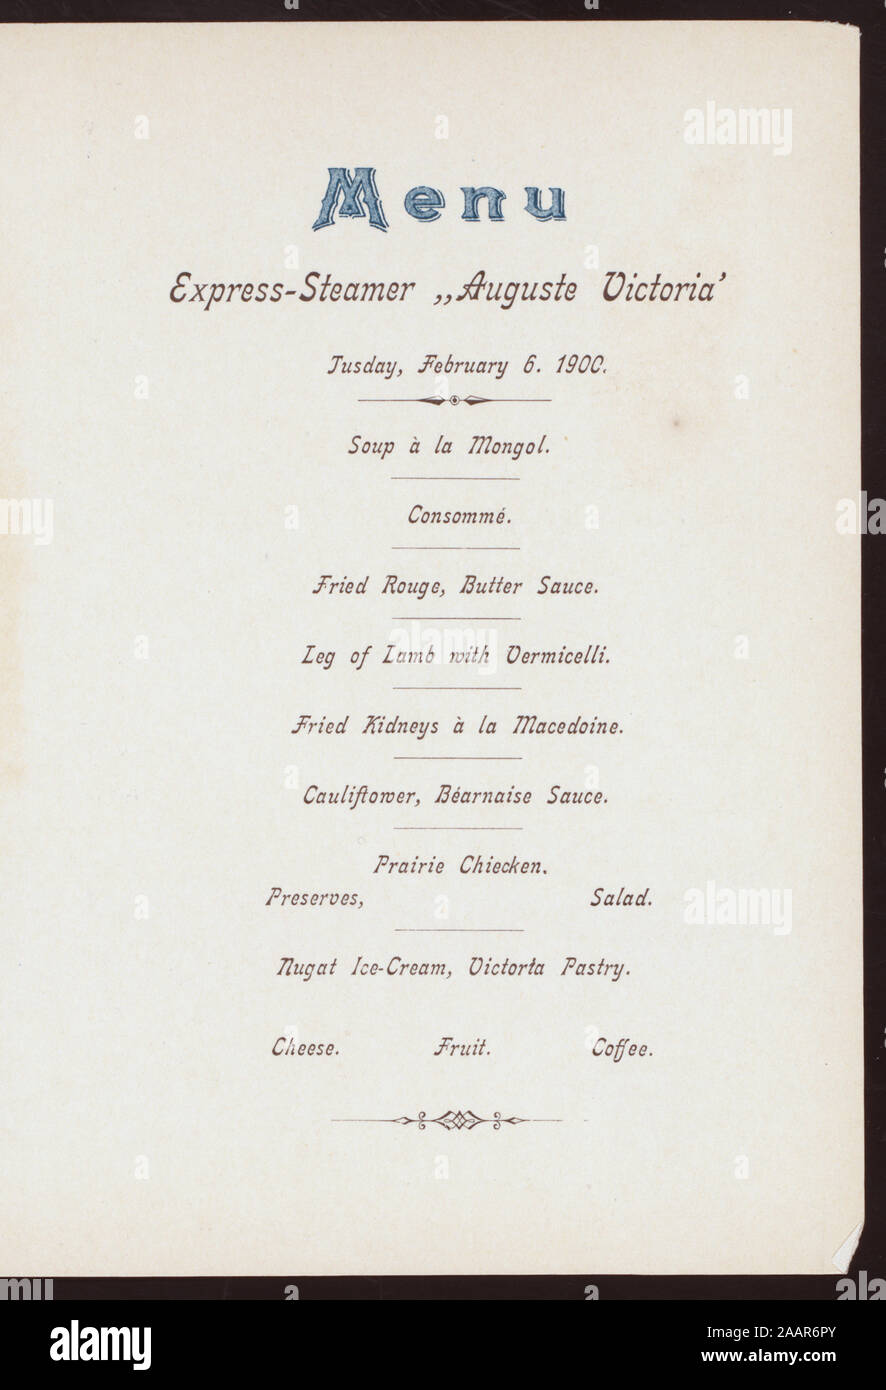 DINNER (held by) HAMBURG AMERIKA LINIE (at) SCHNELLDAMFERS AUGUSTE VICTORIA (SS;) ILLUS, ALGIERS IN BACKGROUND; SAILING SHIPS IN FOREGROUND; CONCERT PROGRAMM LISTED;; DINNER [held by] HAMBURG AMERIKA LINIE [at] SCHNELLDAMFERS AUGUSTE VICTORIA (SS;) Stock Photo